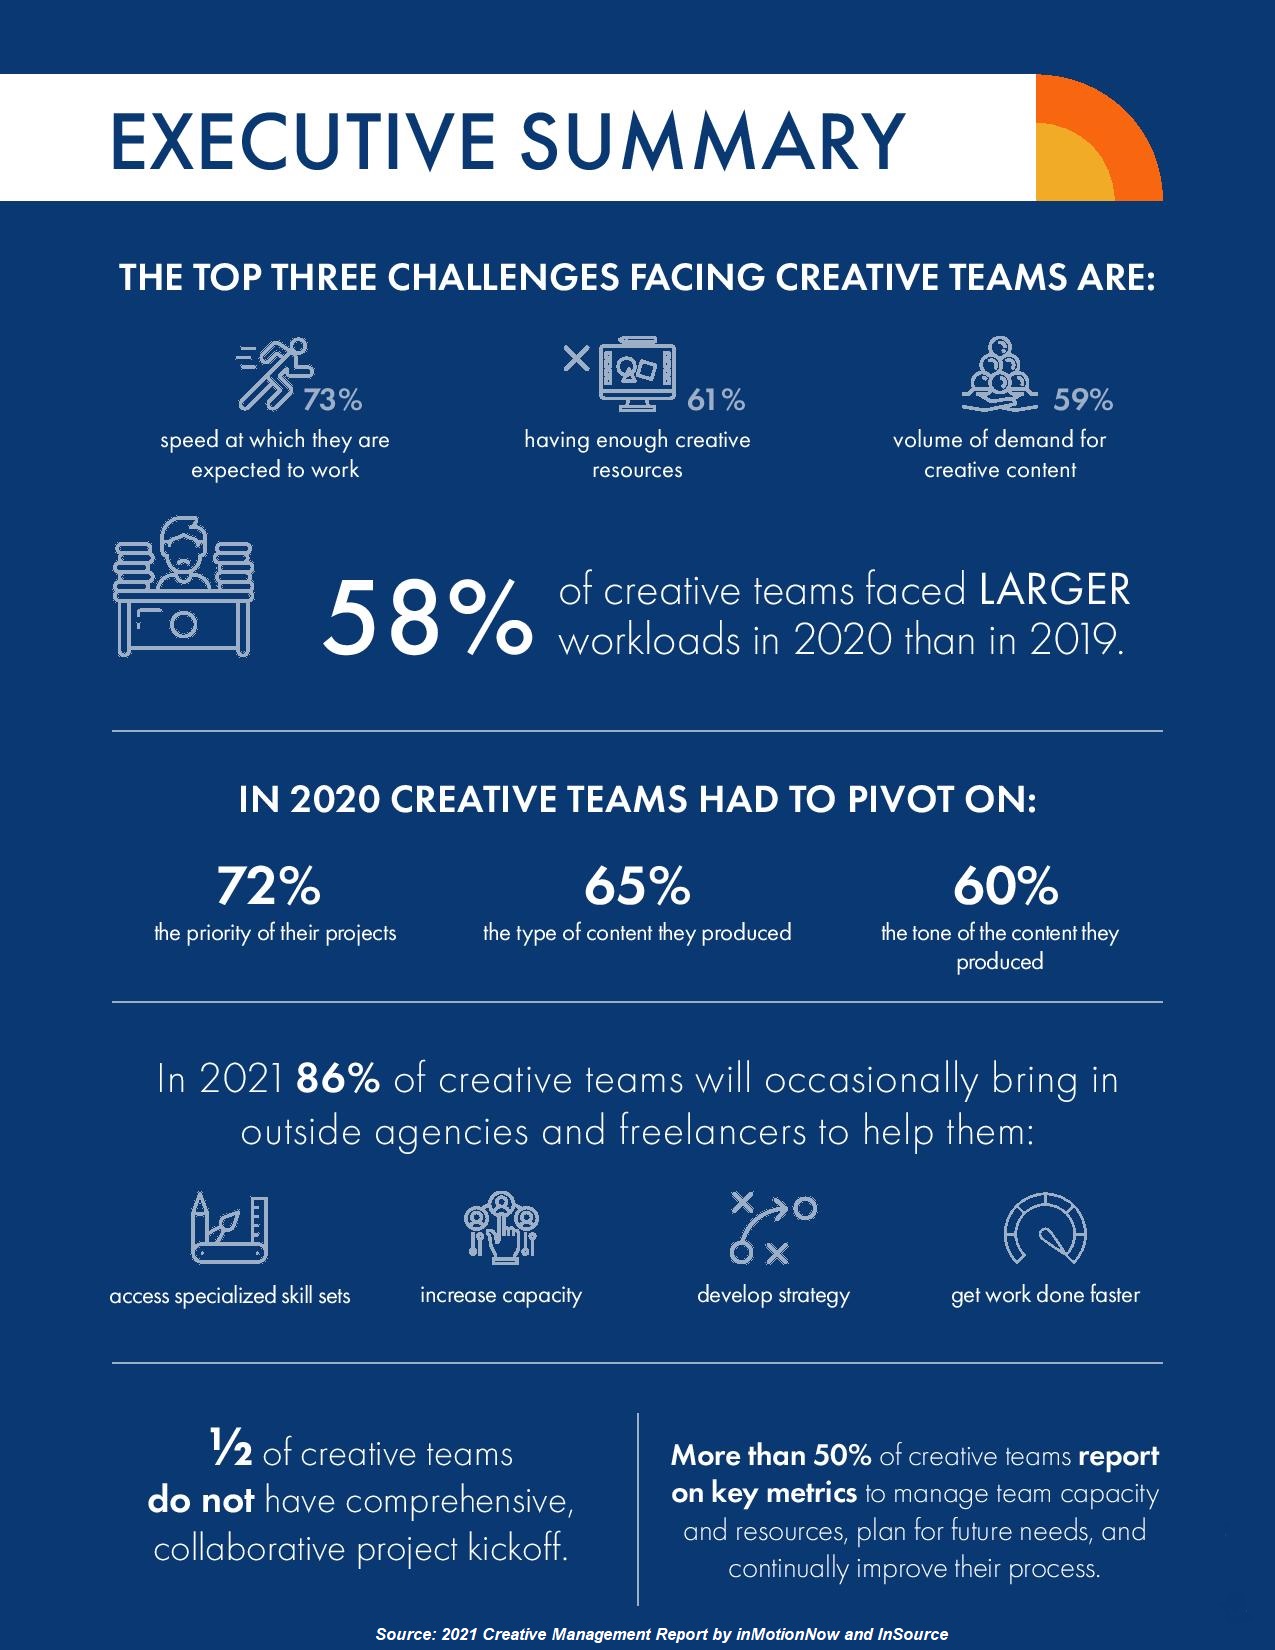 Executive summary to the 2021 Creative Management Report by inMotionNow and InSource